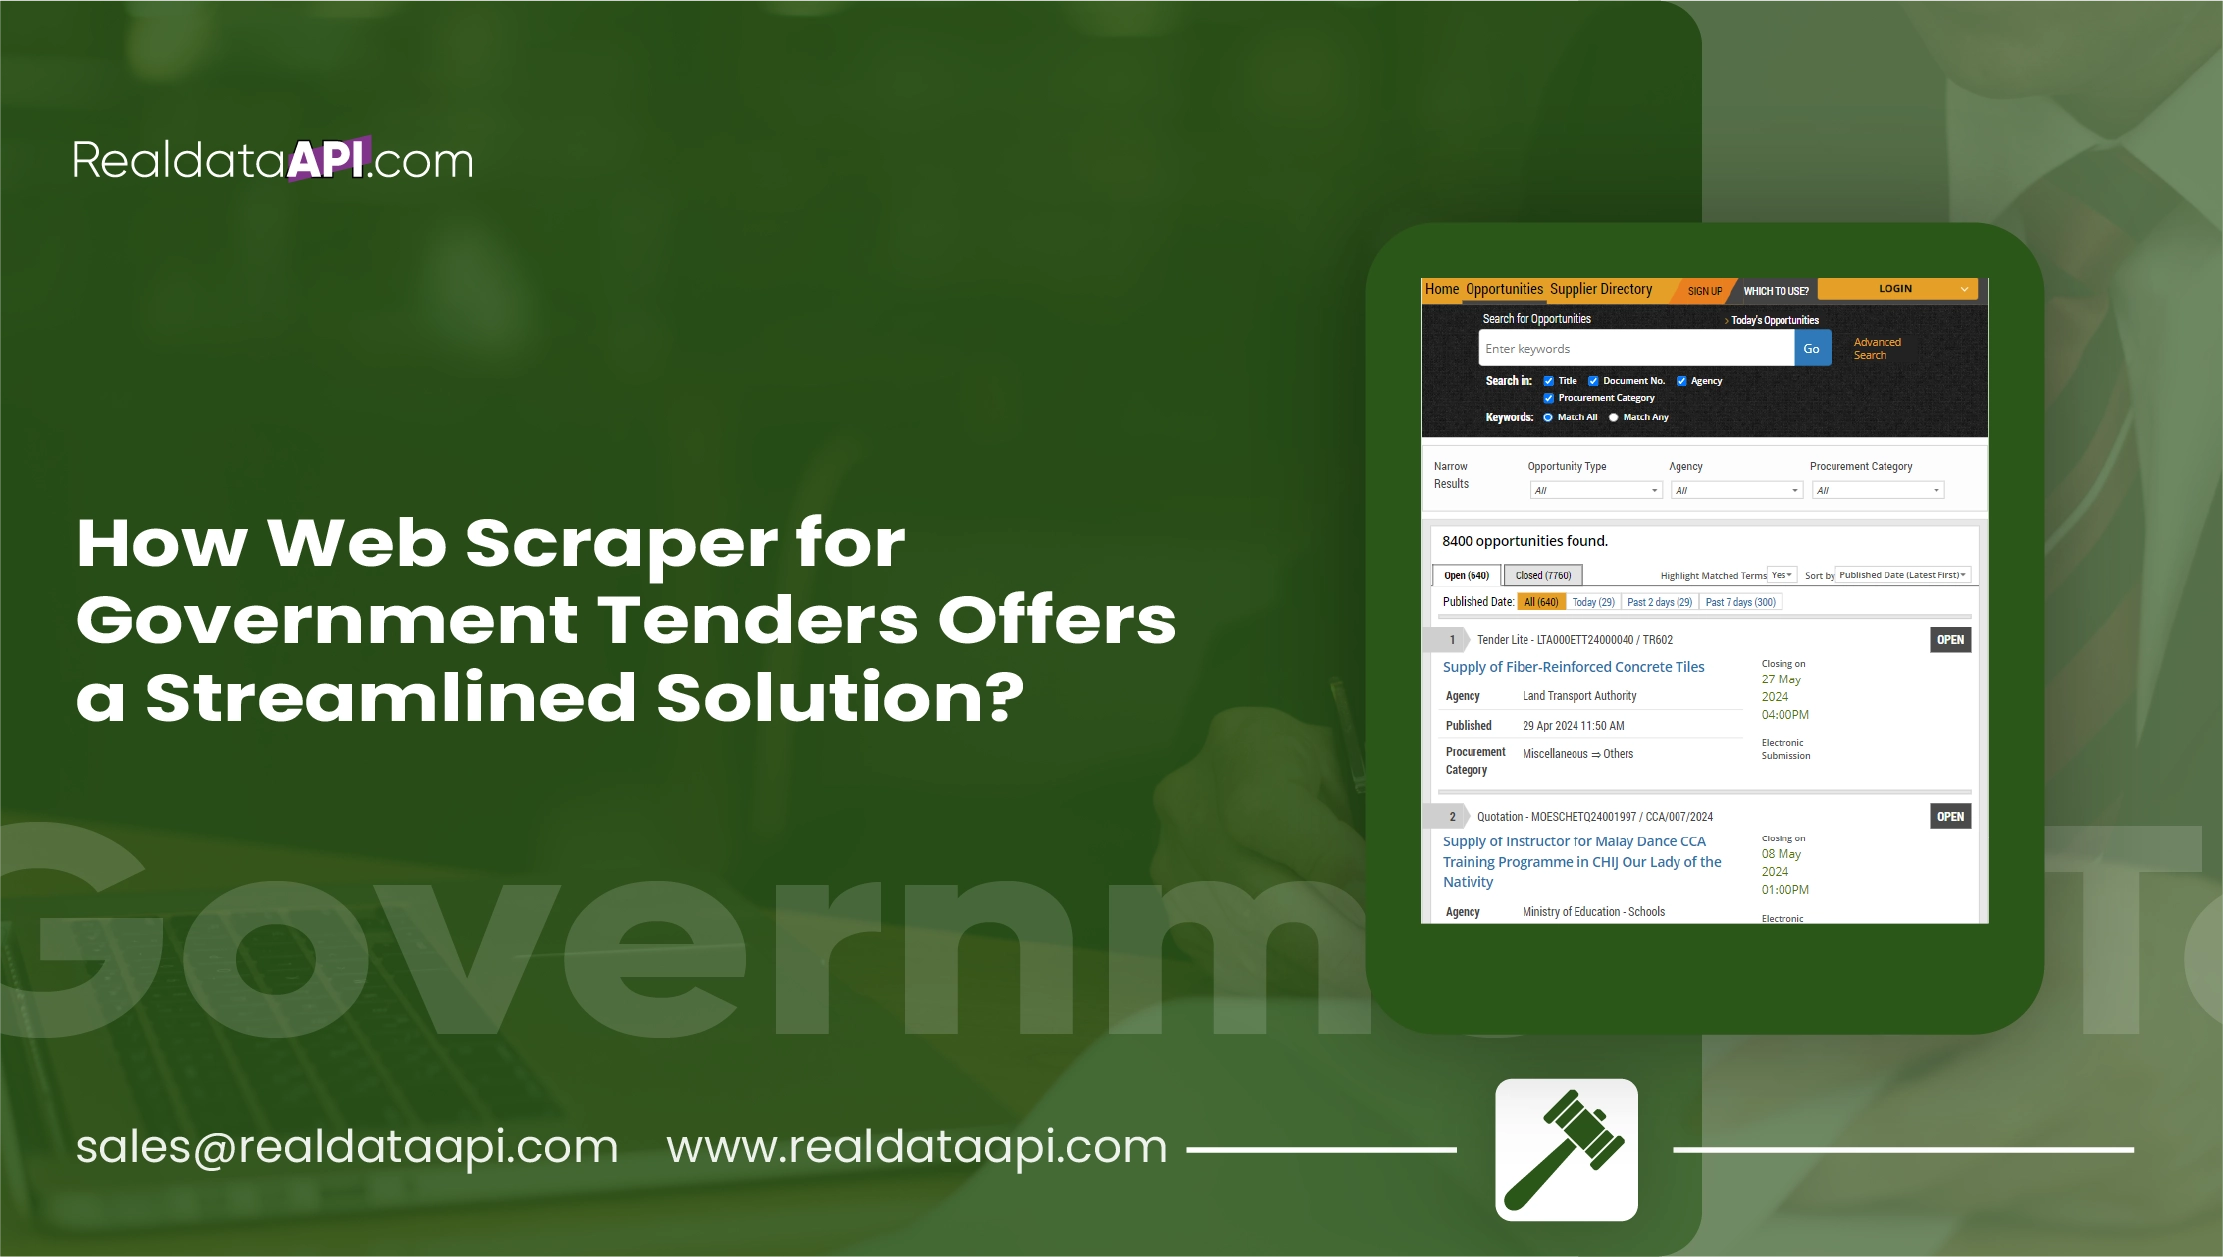 How-Web-Scraper-for-Government-Tenders-Offers-a-Streamlined-Solution-01